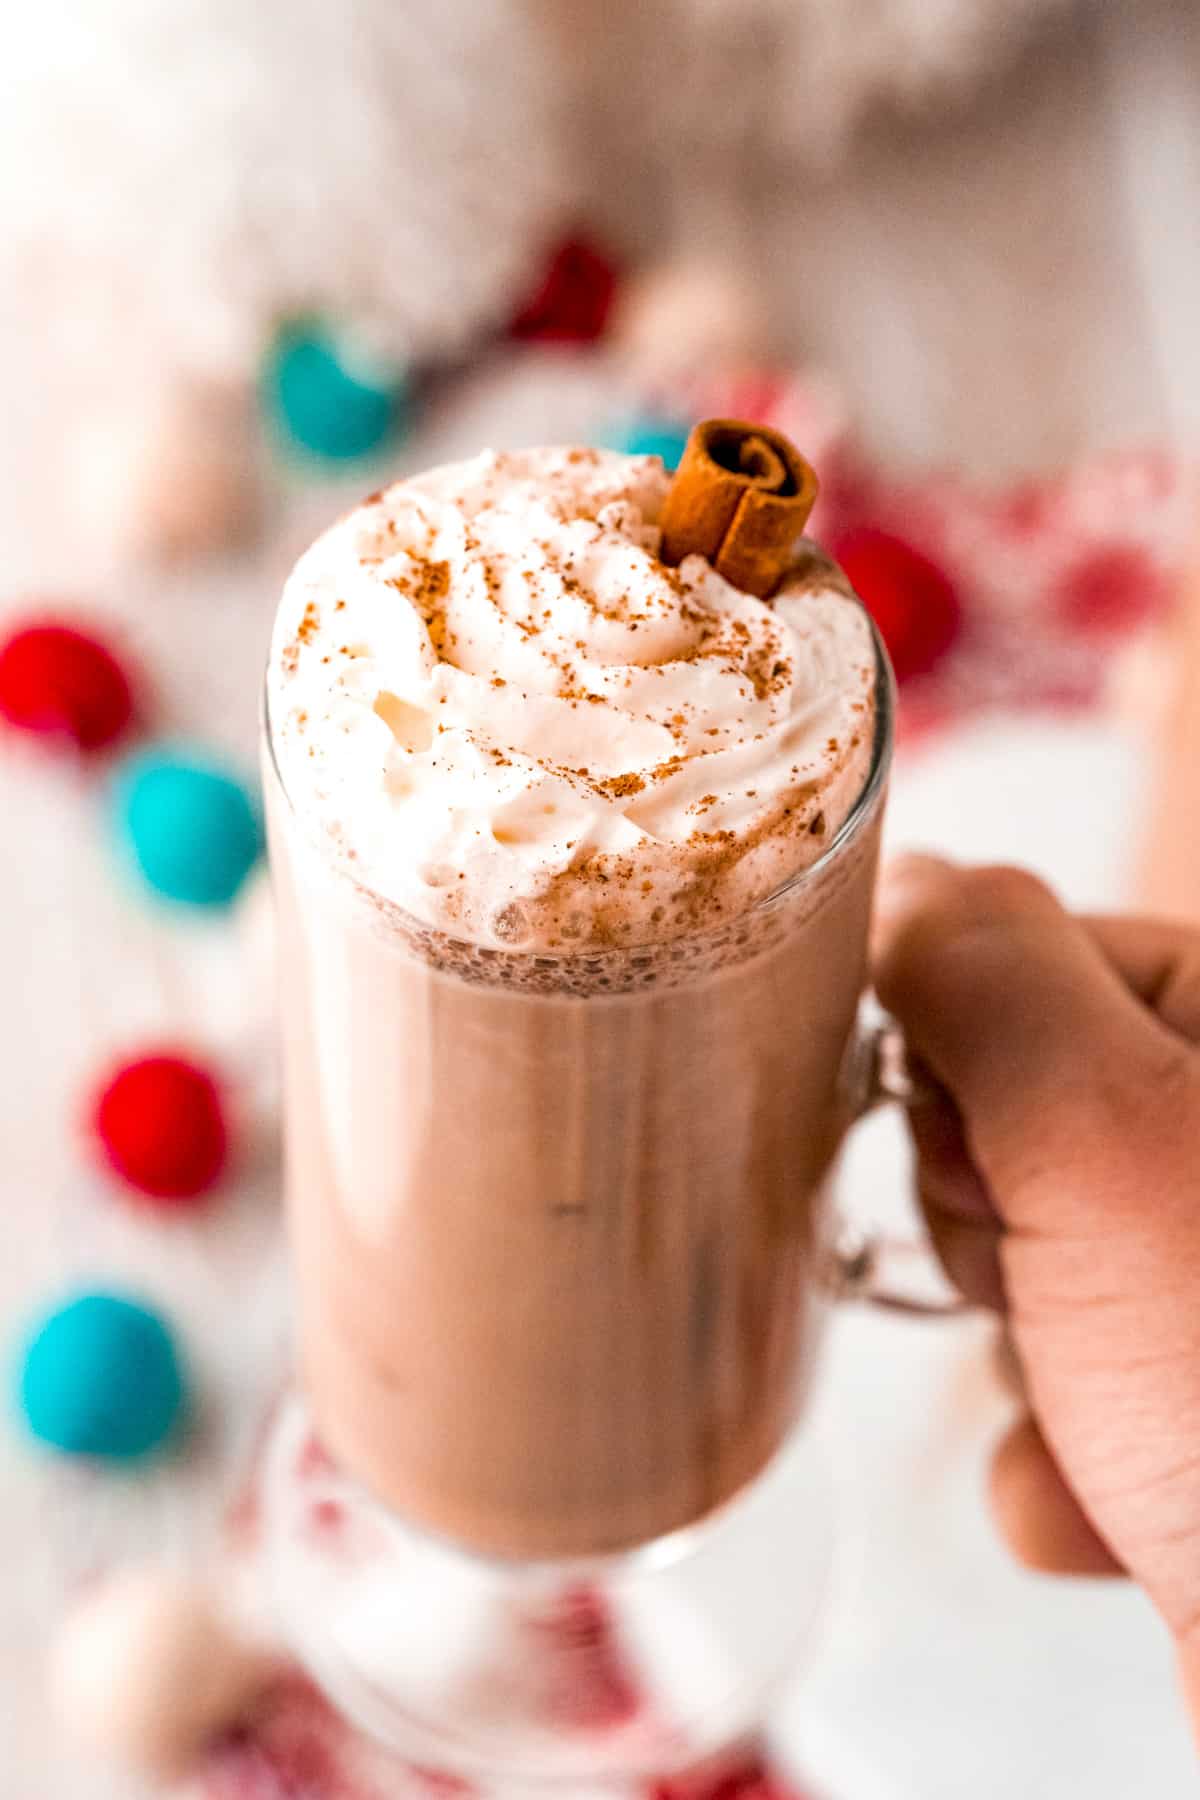 Hand holding up one Eggnog Hot Chocolate showing whipped cream, garnish and cinnamon stick.